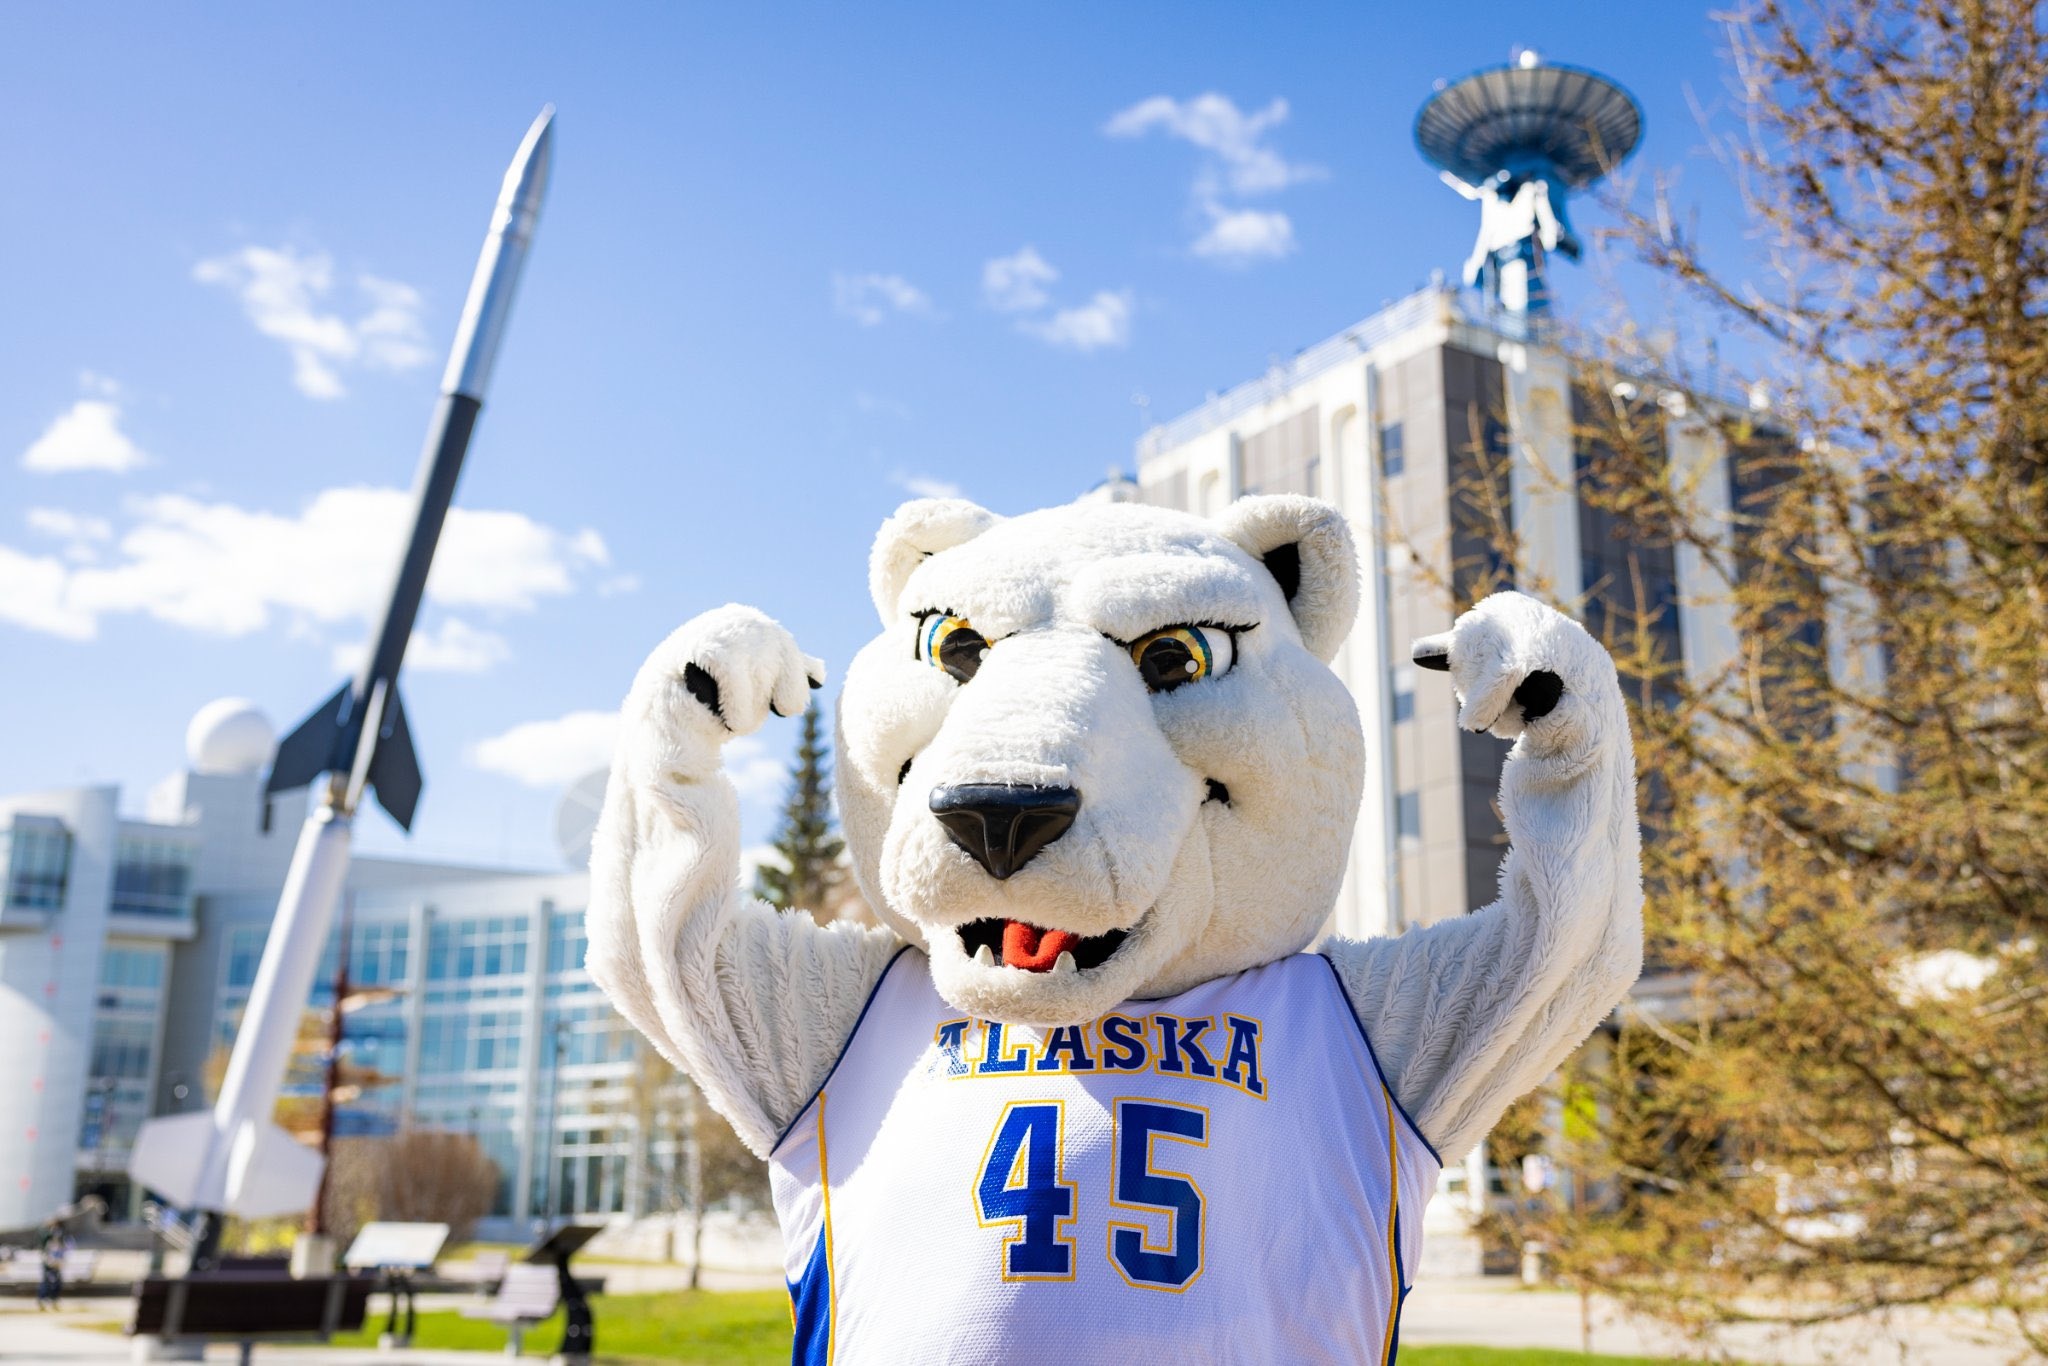 polar bear mascot in front of a rocket and some buildings